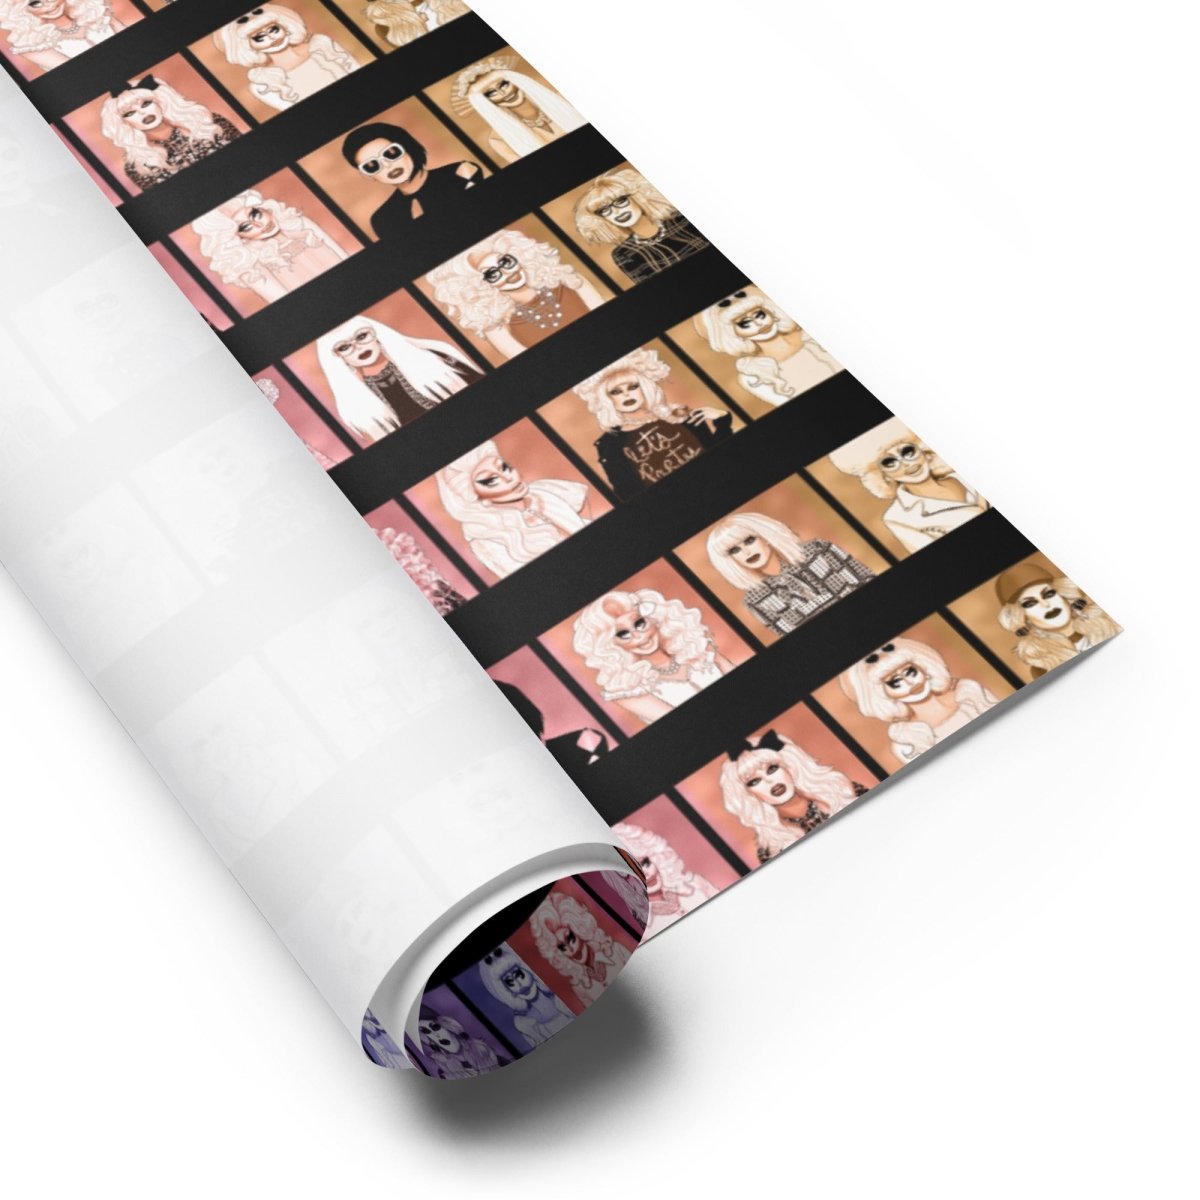 Trixie & Katya - Gradient Wrapping paper sheets - dragqueenmerch